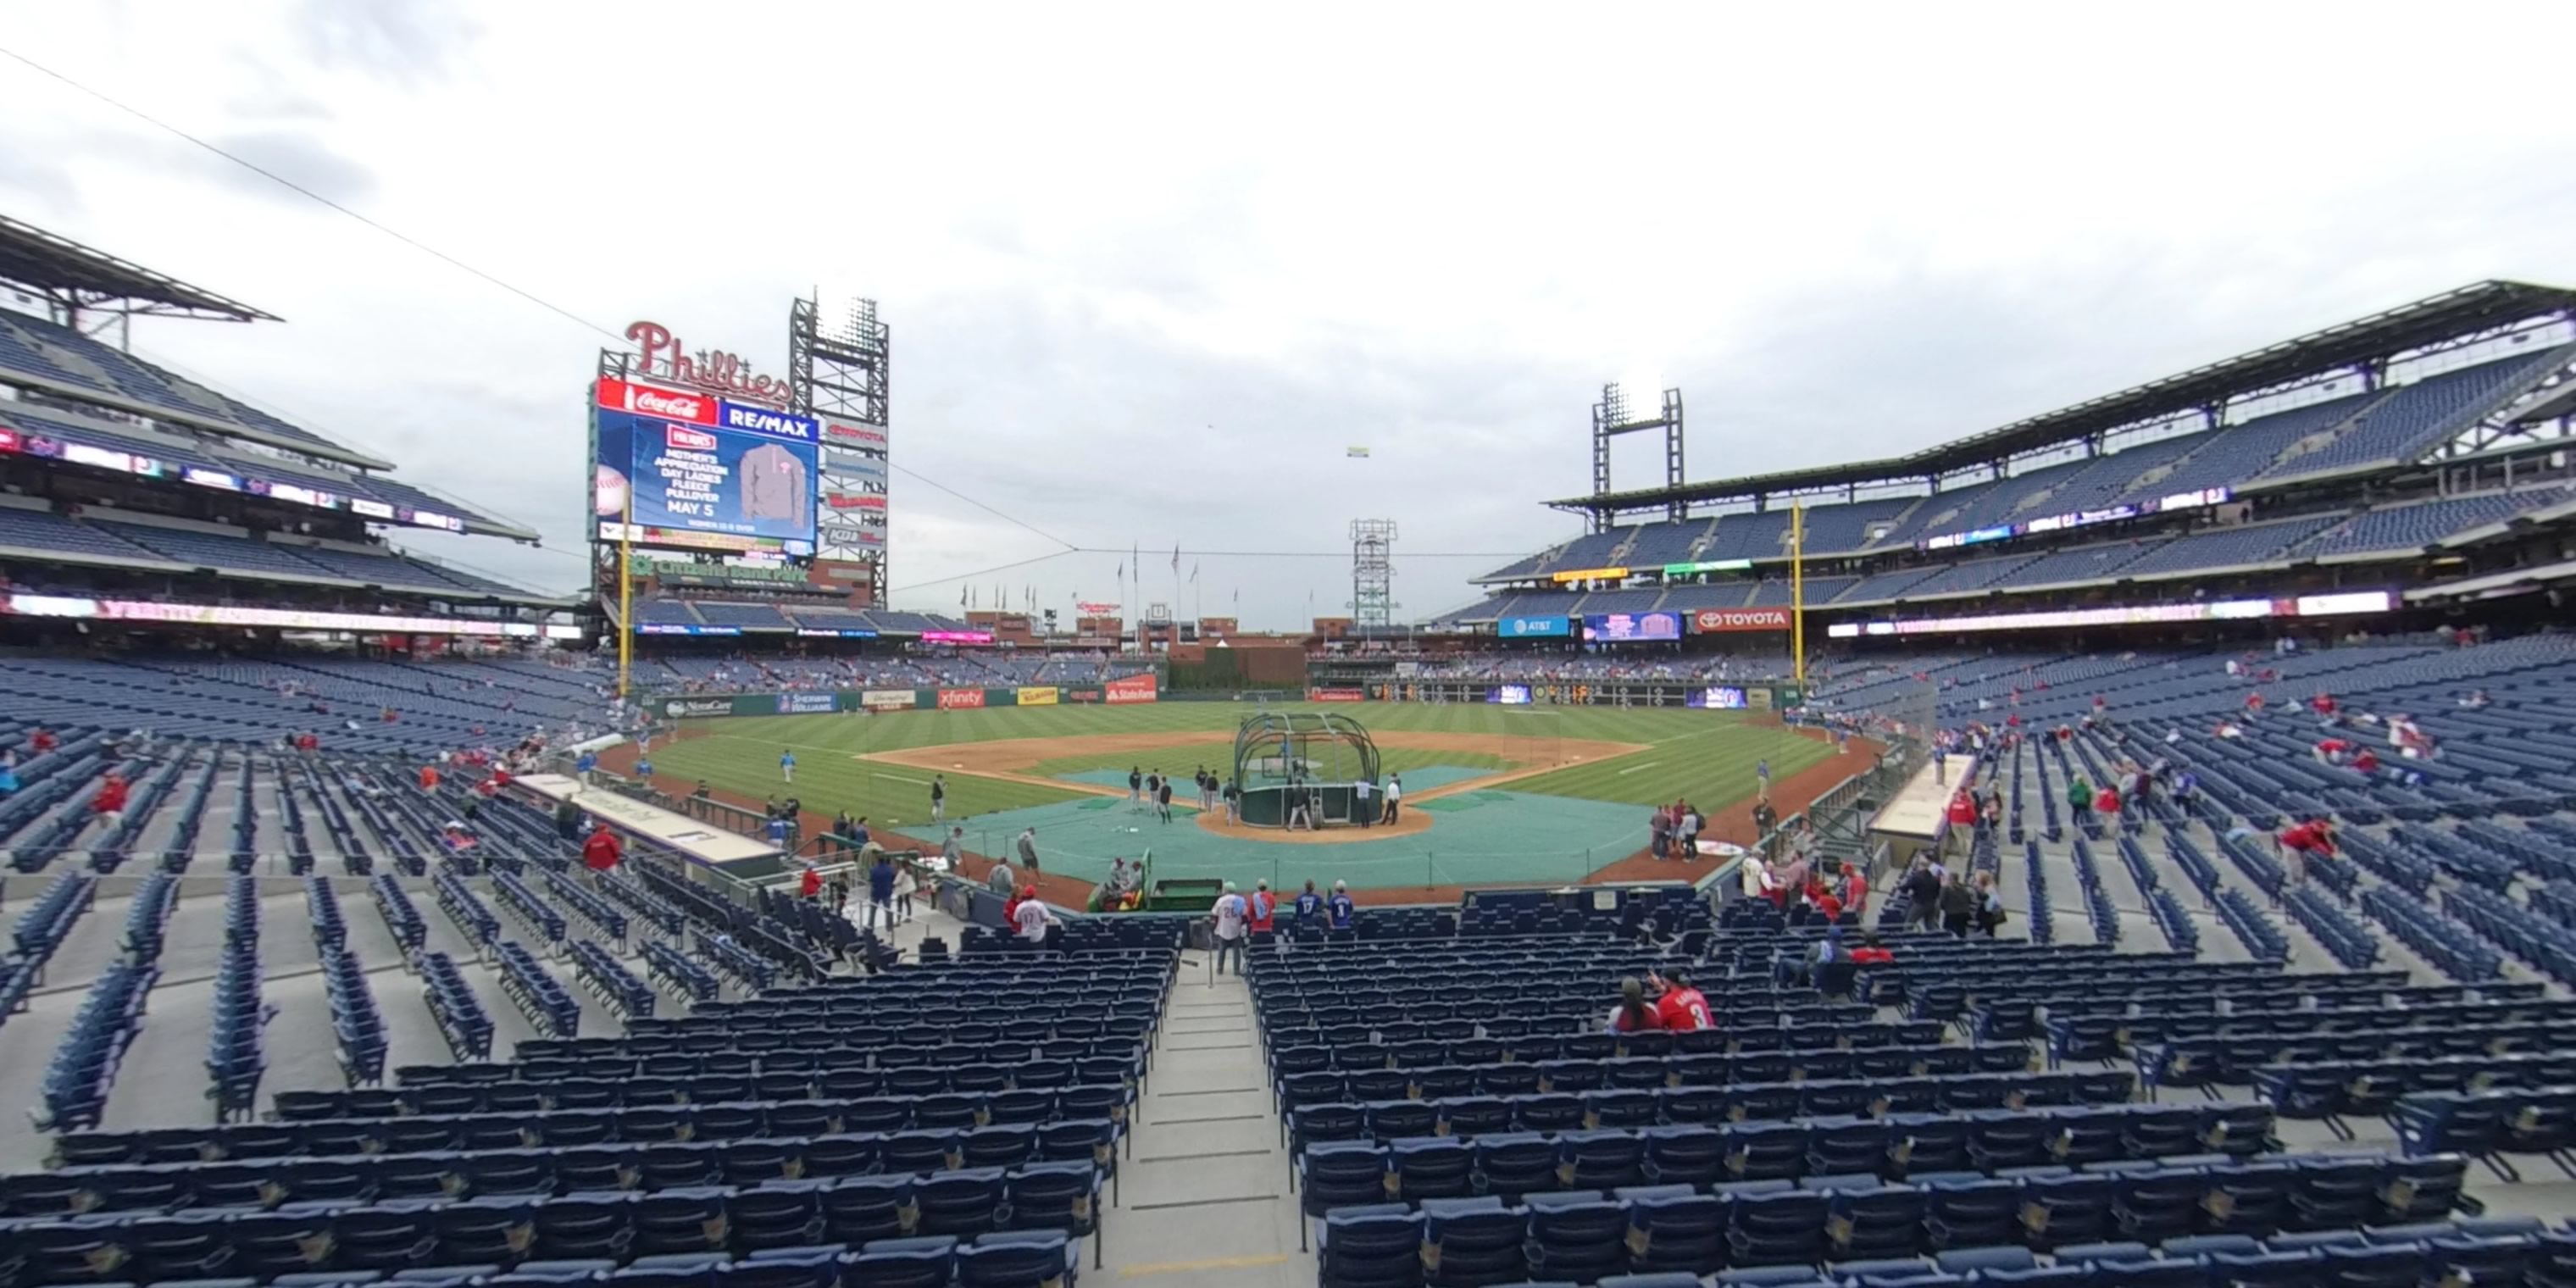 Citizens Bank Park Seating Chart + Rows, Seats and Club Seats